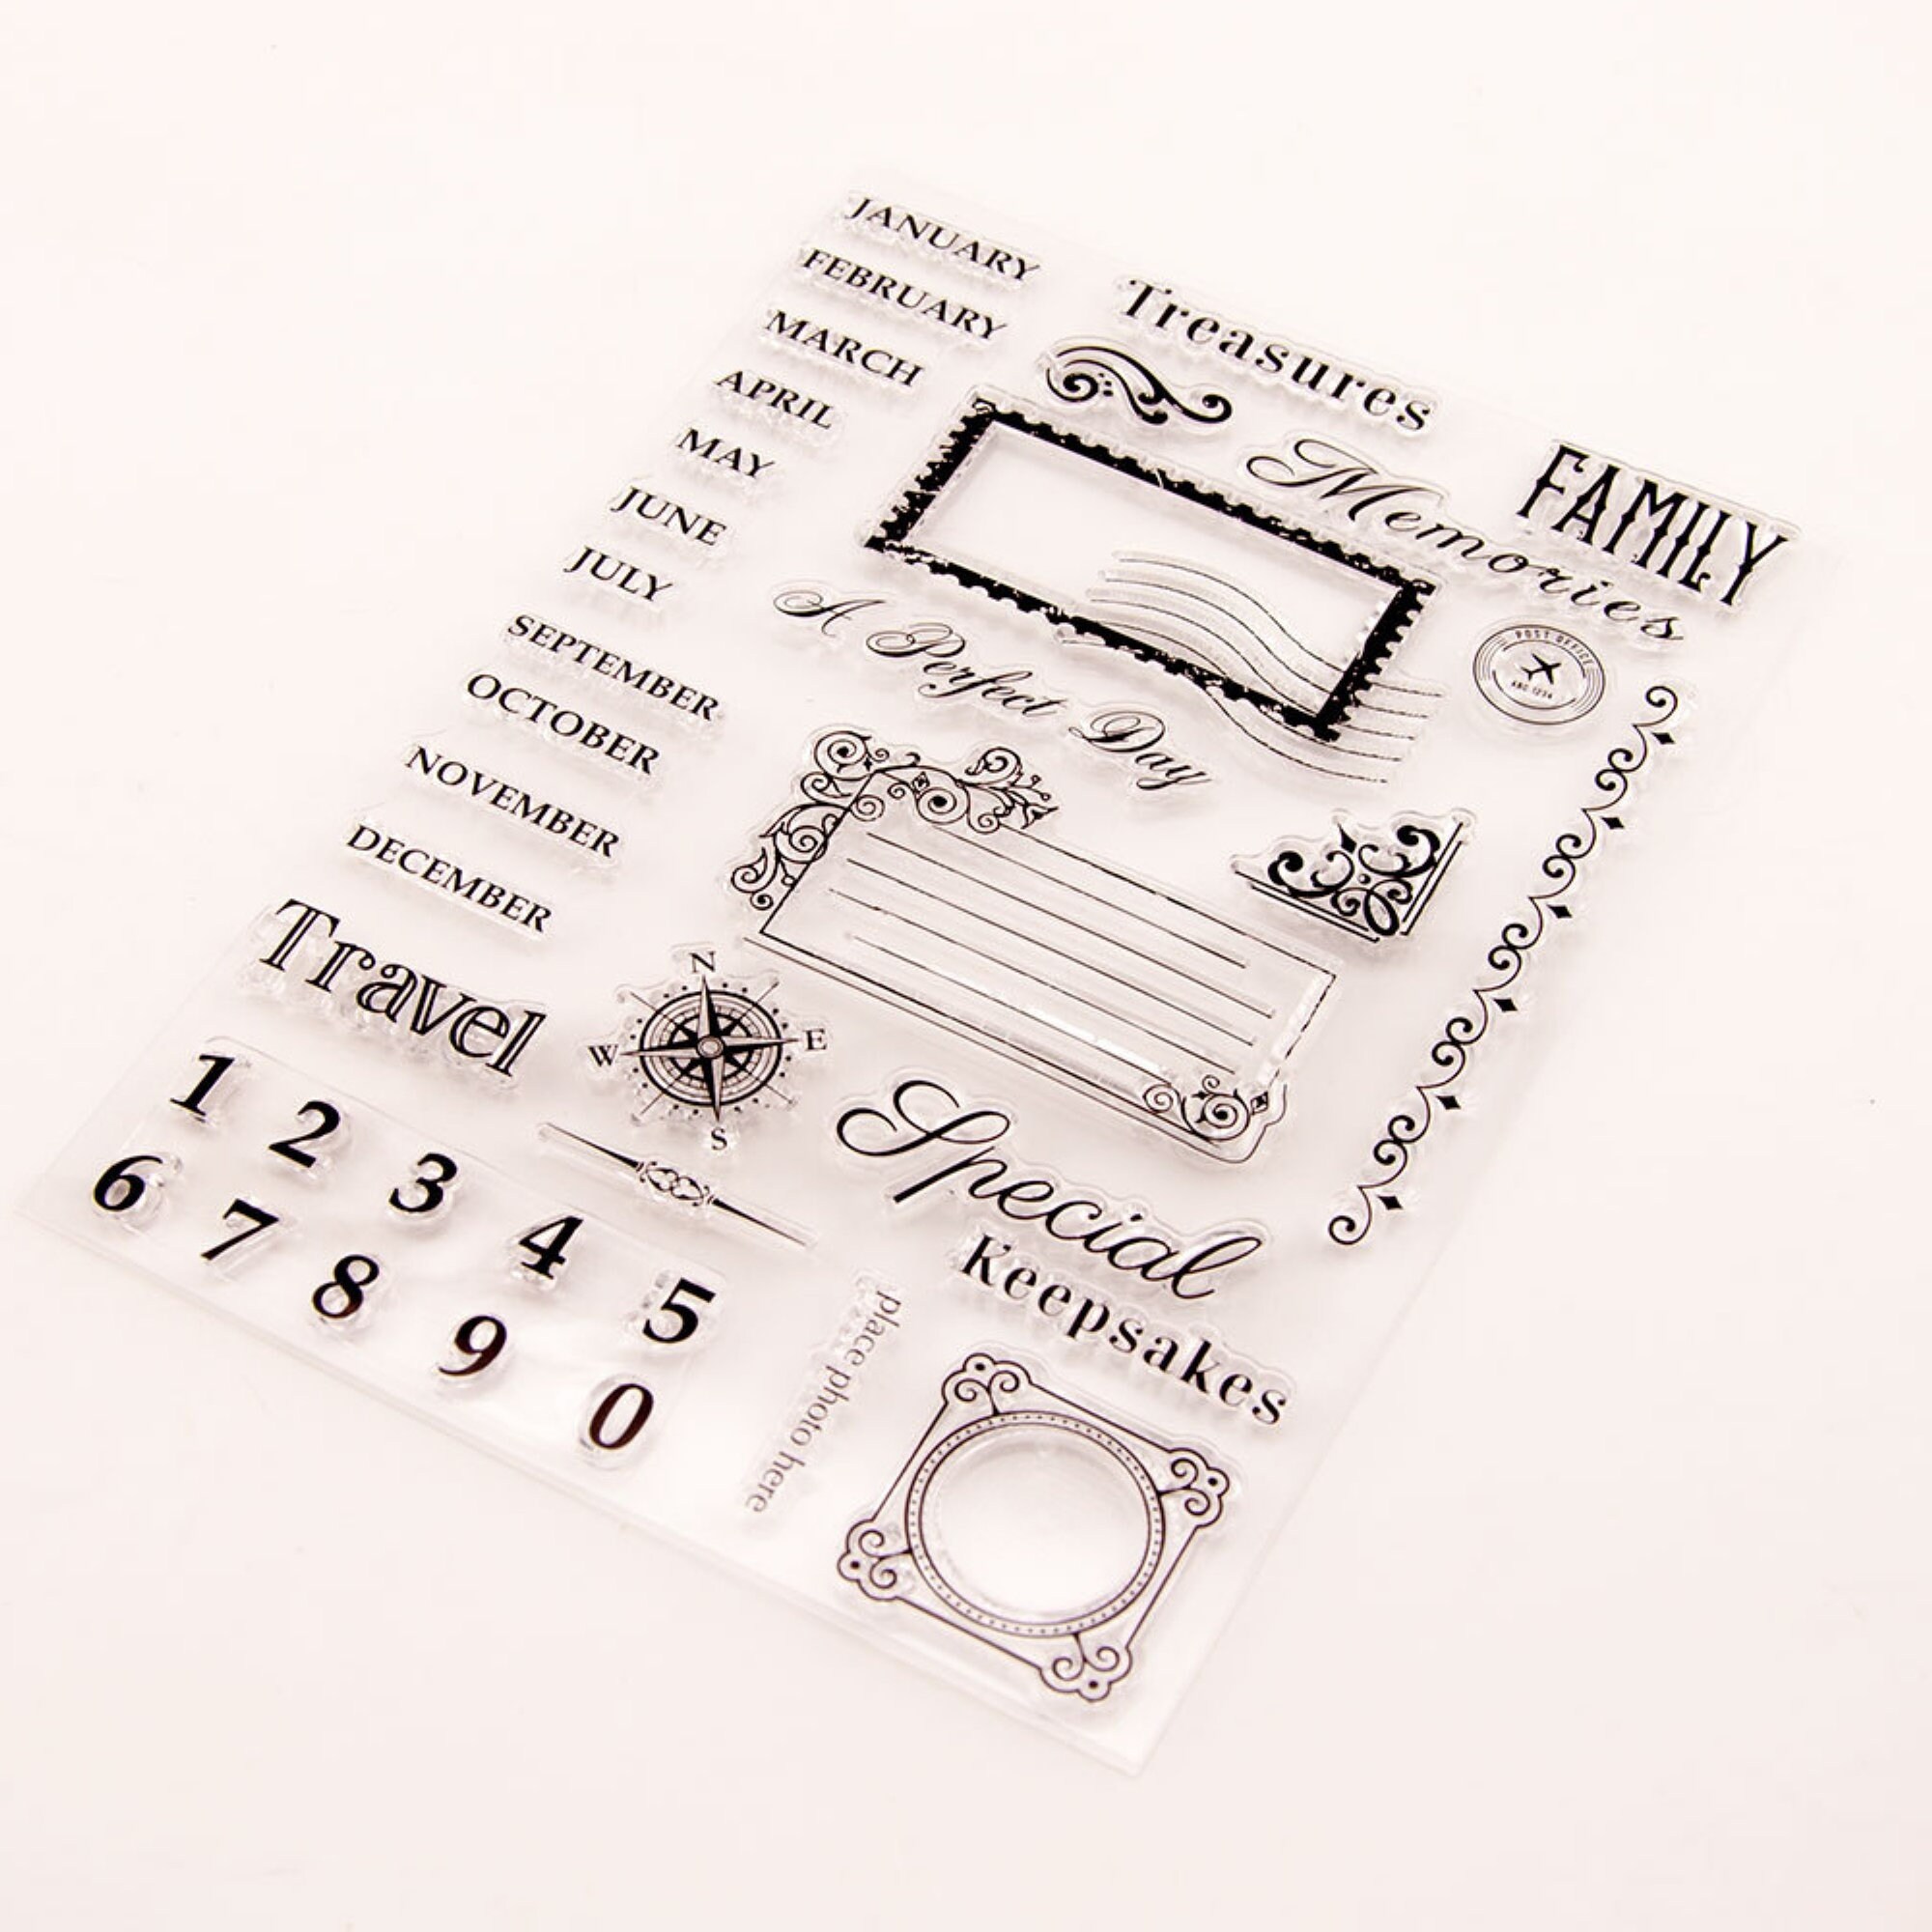 Journal Stamp Set No. 1  Journal, Diy travel journal, Day planners